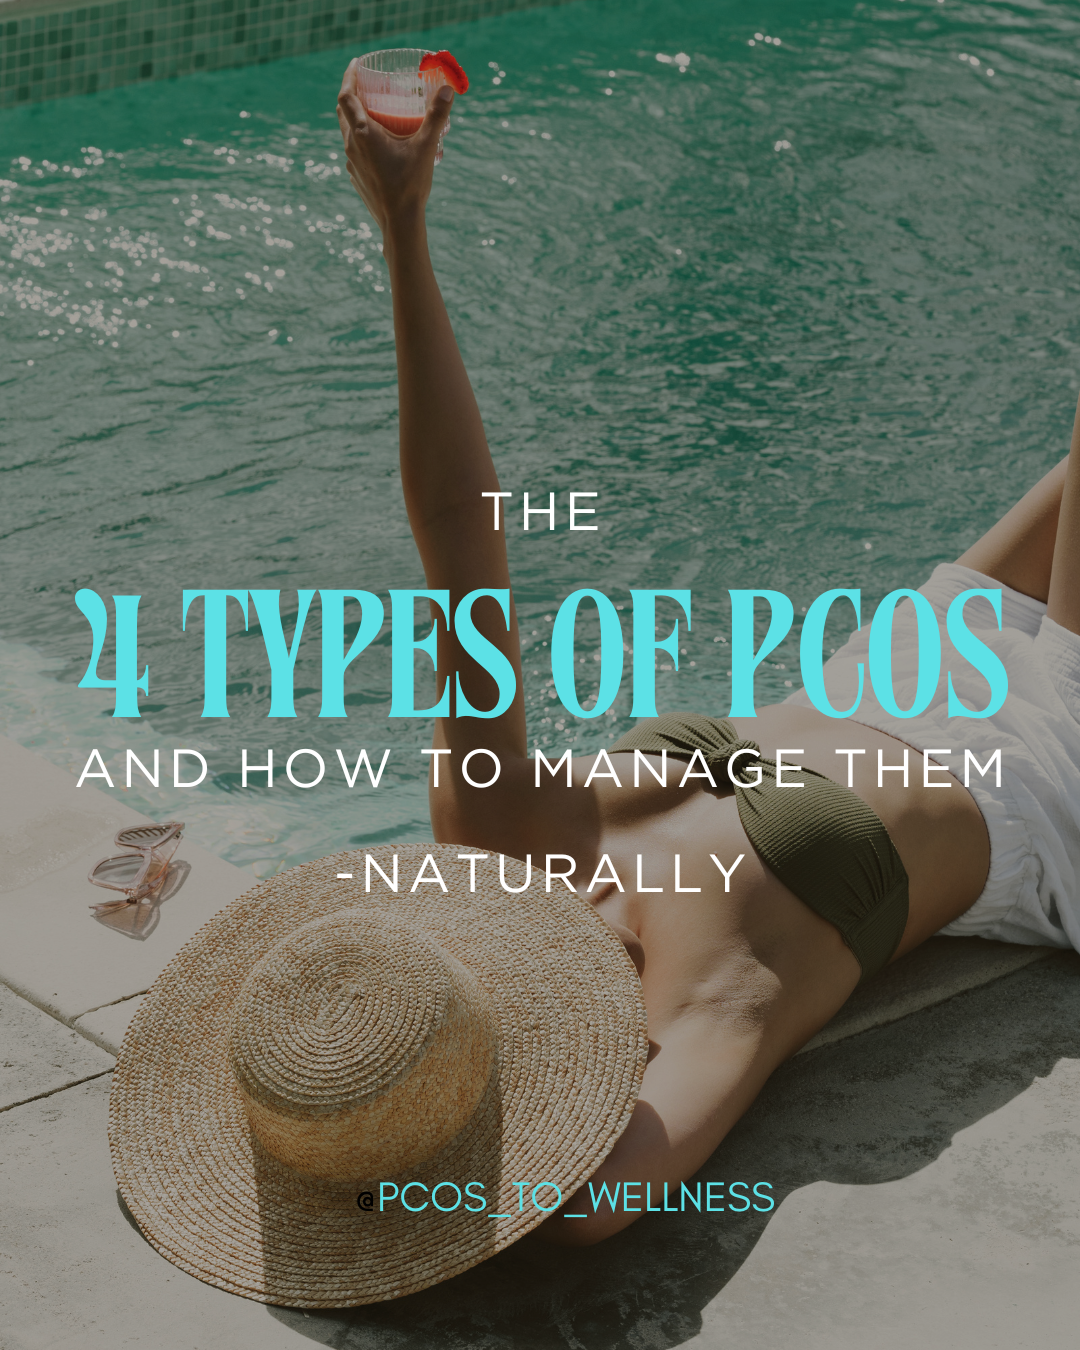 The 4 Types of PCOS and How to Manage Them - Naturally